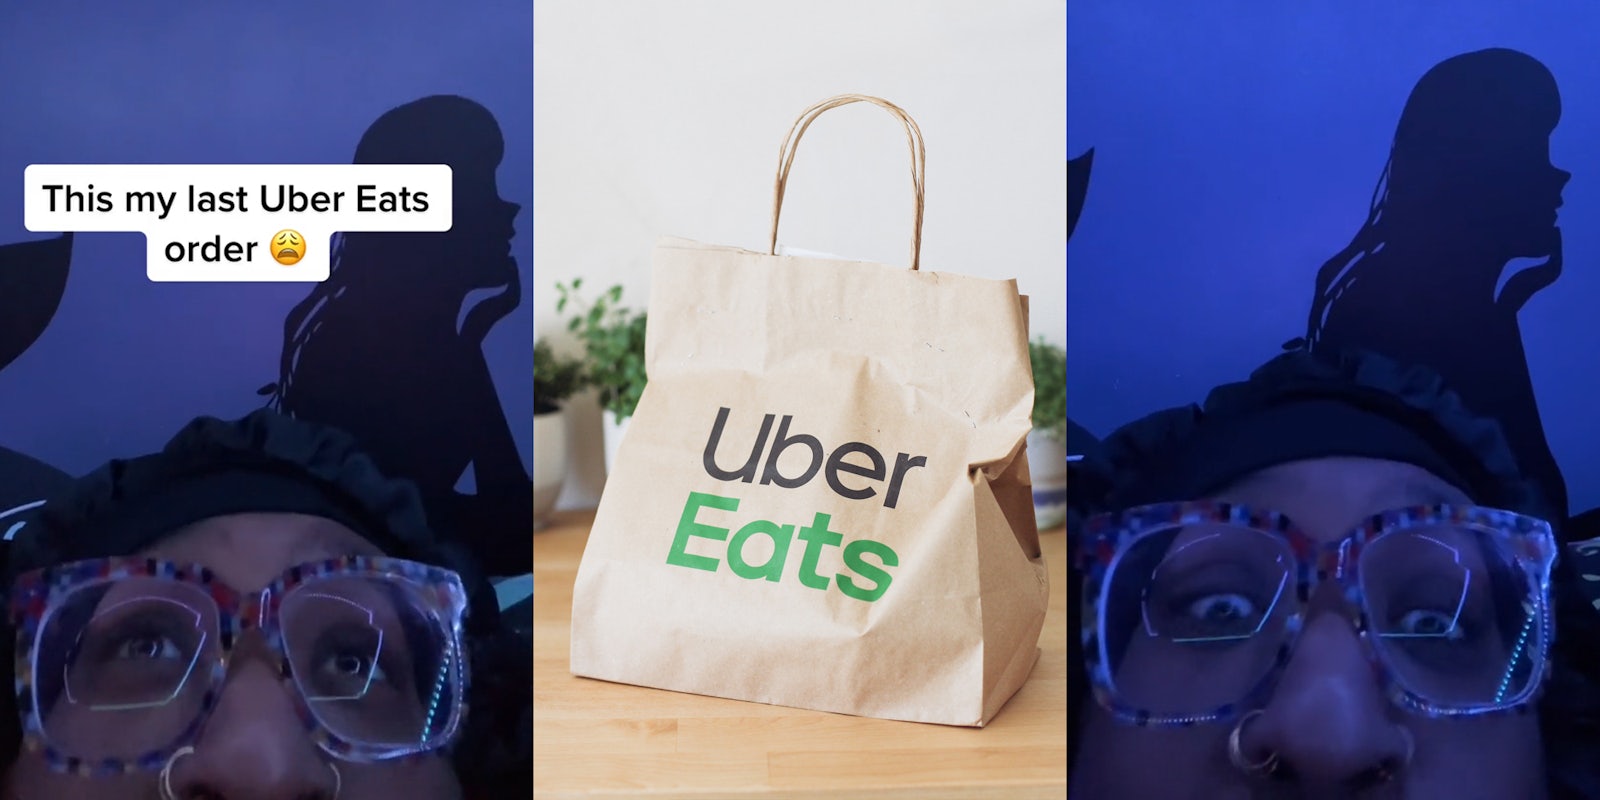 Uber Eats customer speaking in bed with caption 'This my last Uber Eats order' (l) Uber Eats delivery in branded paper bag on wood floor in front of white wall (c) Uber Eats customer speaking in bed (r)